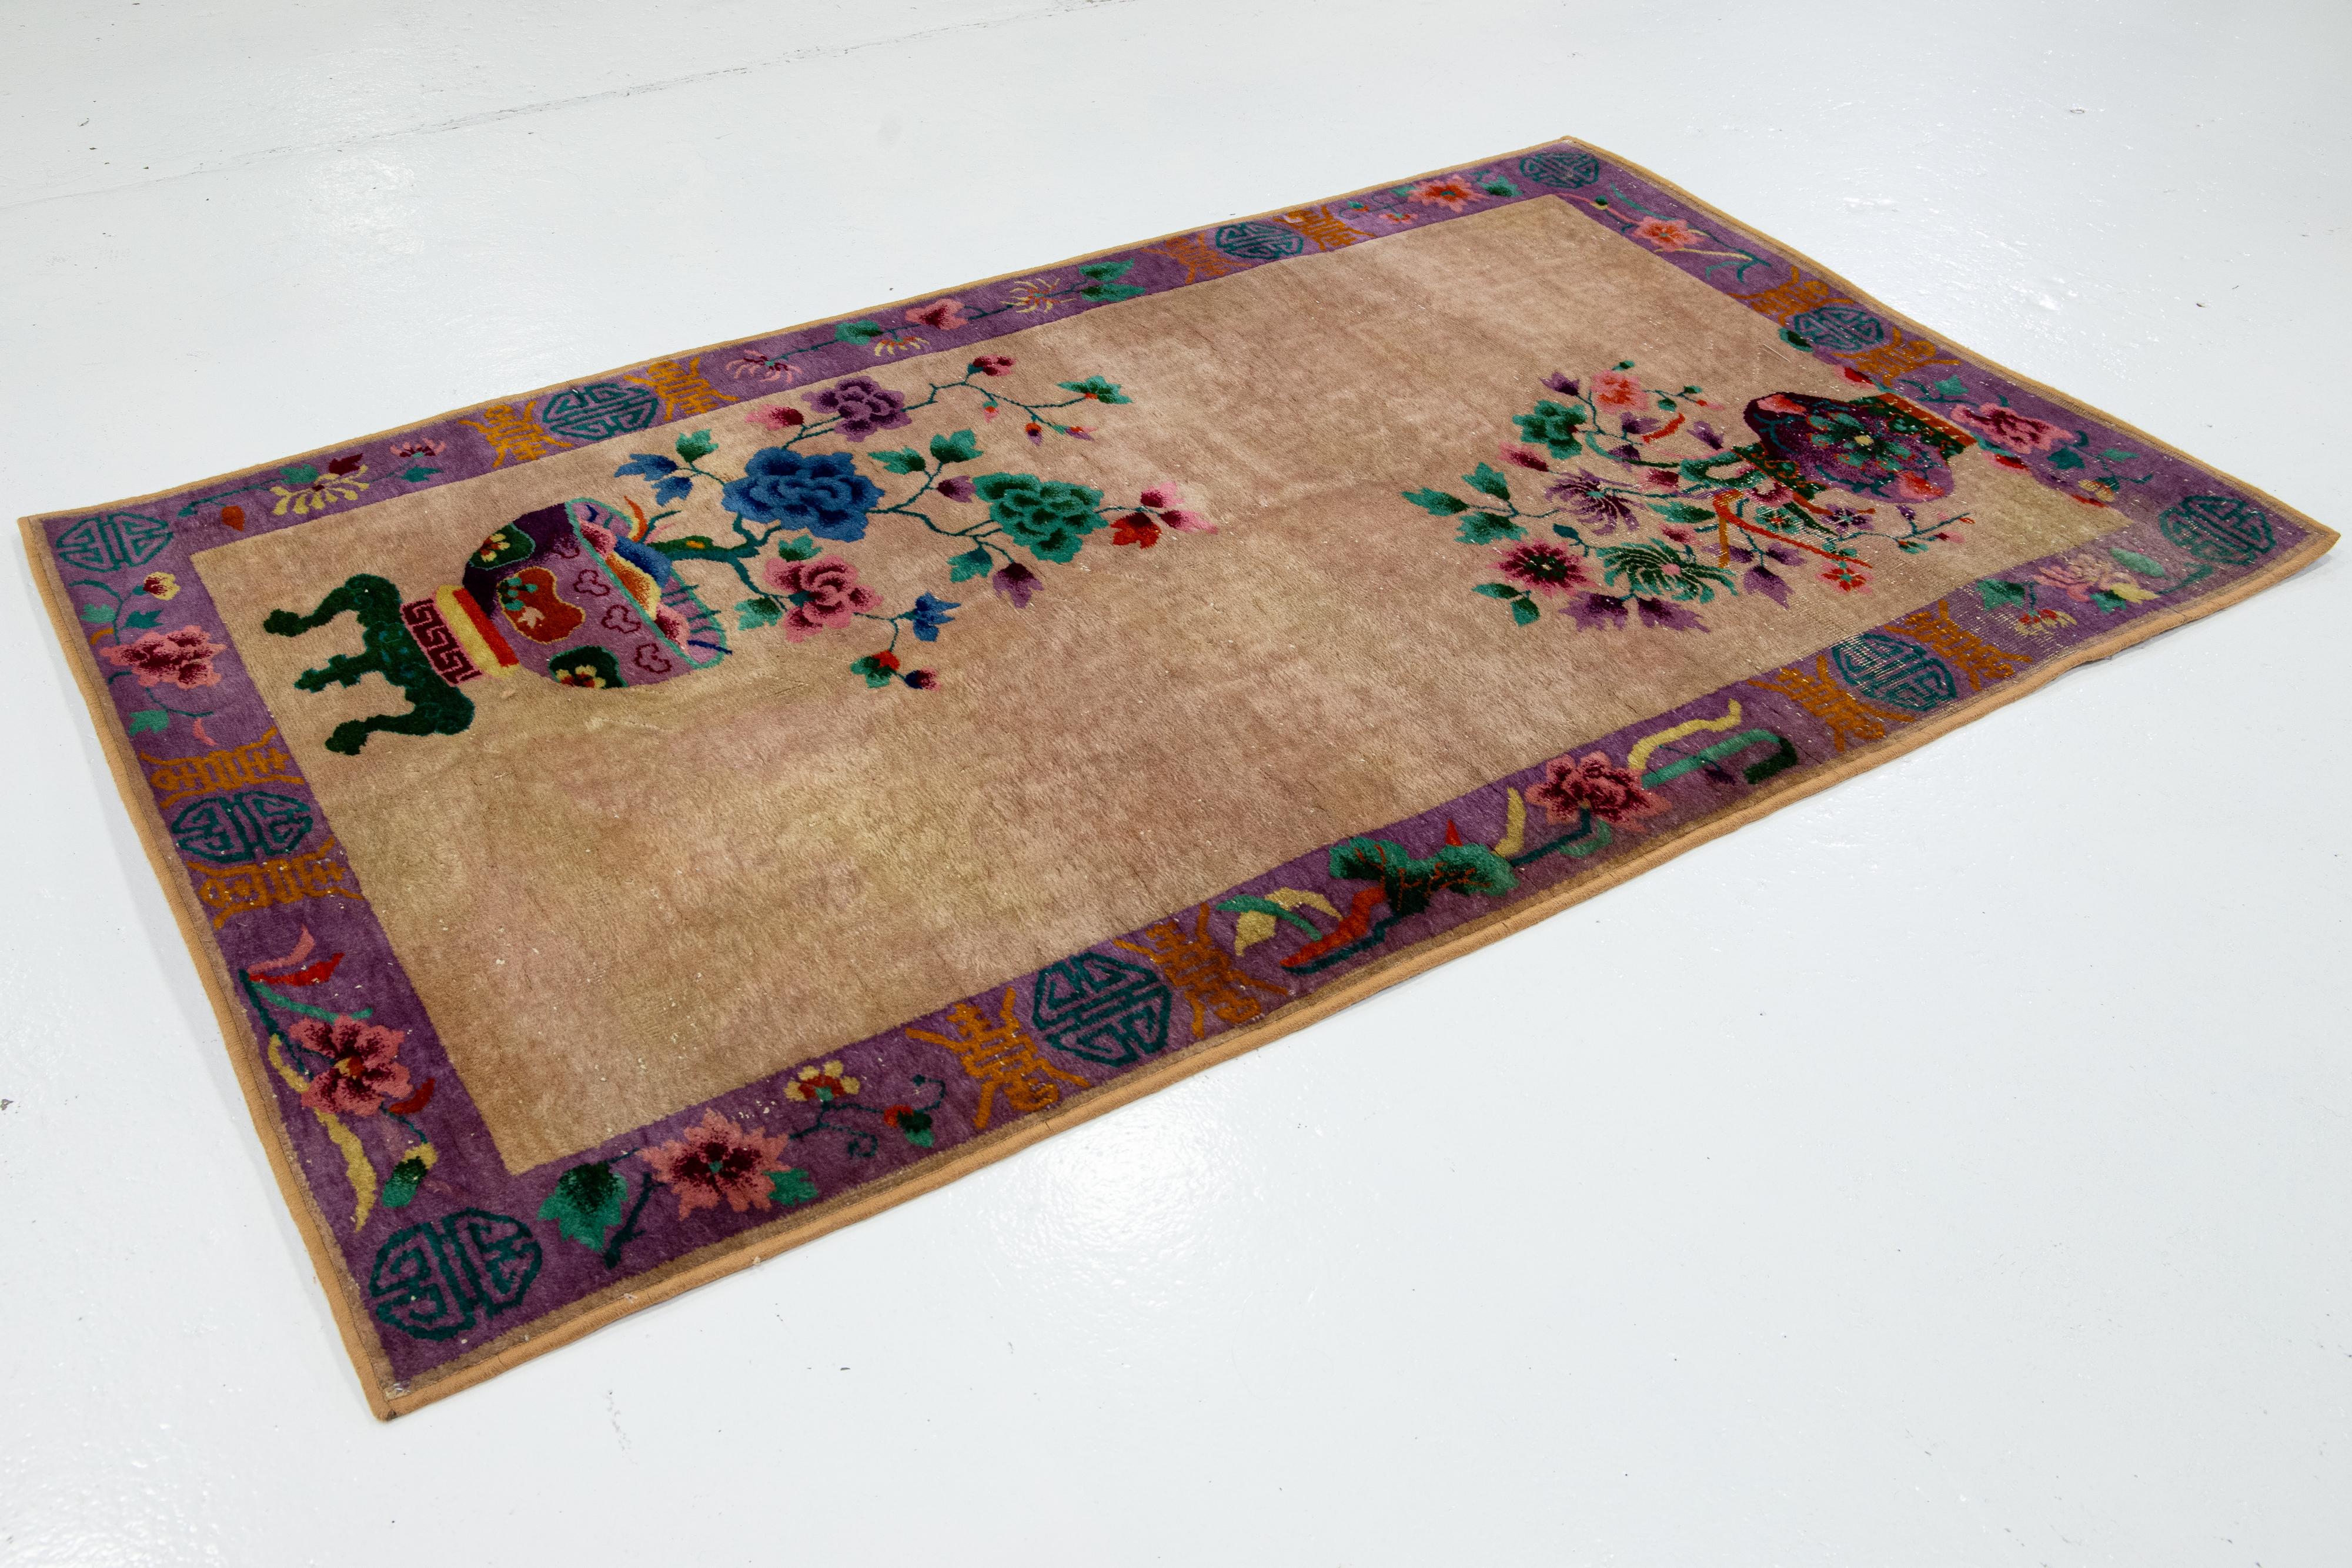 Antique Art Deco Tan and Purple Wool Rug with Classic Chinese Motif 4 X 7 In Good Condition For Sale In Norwalk, CT